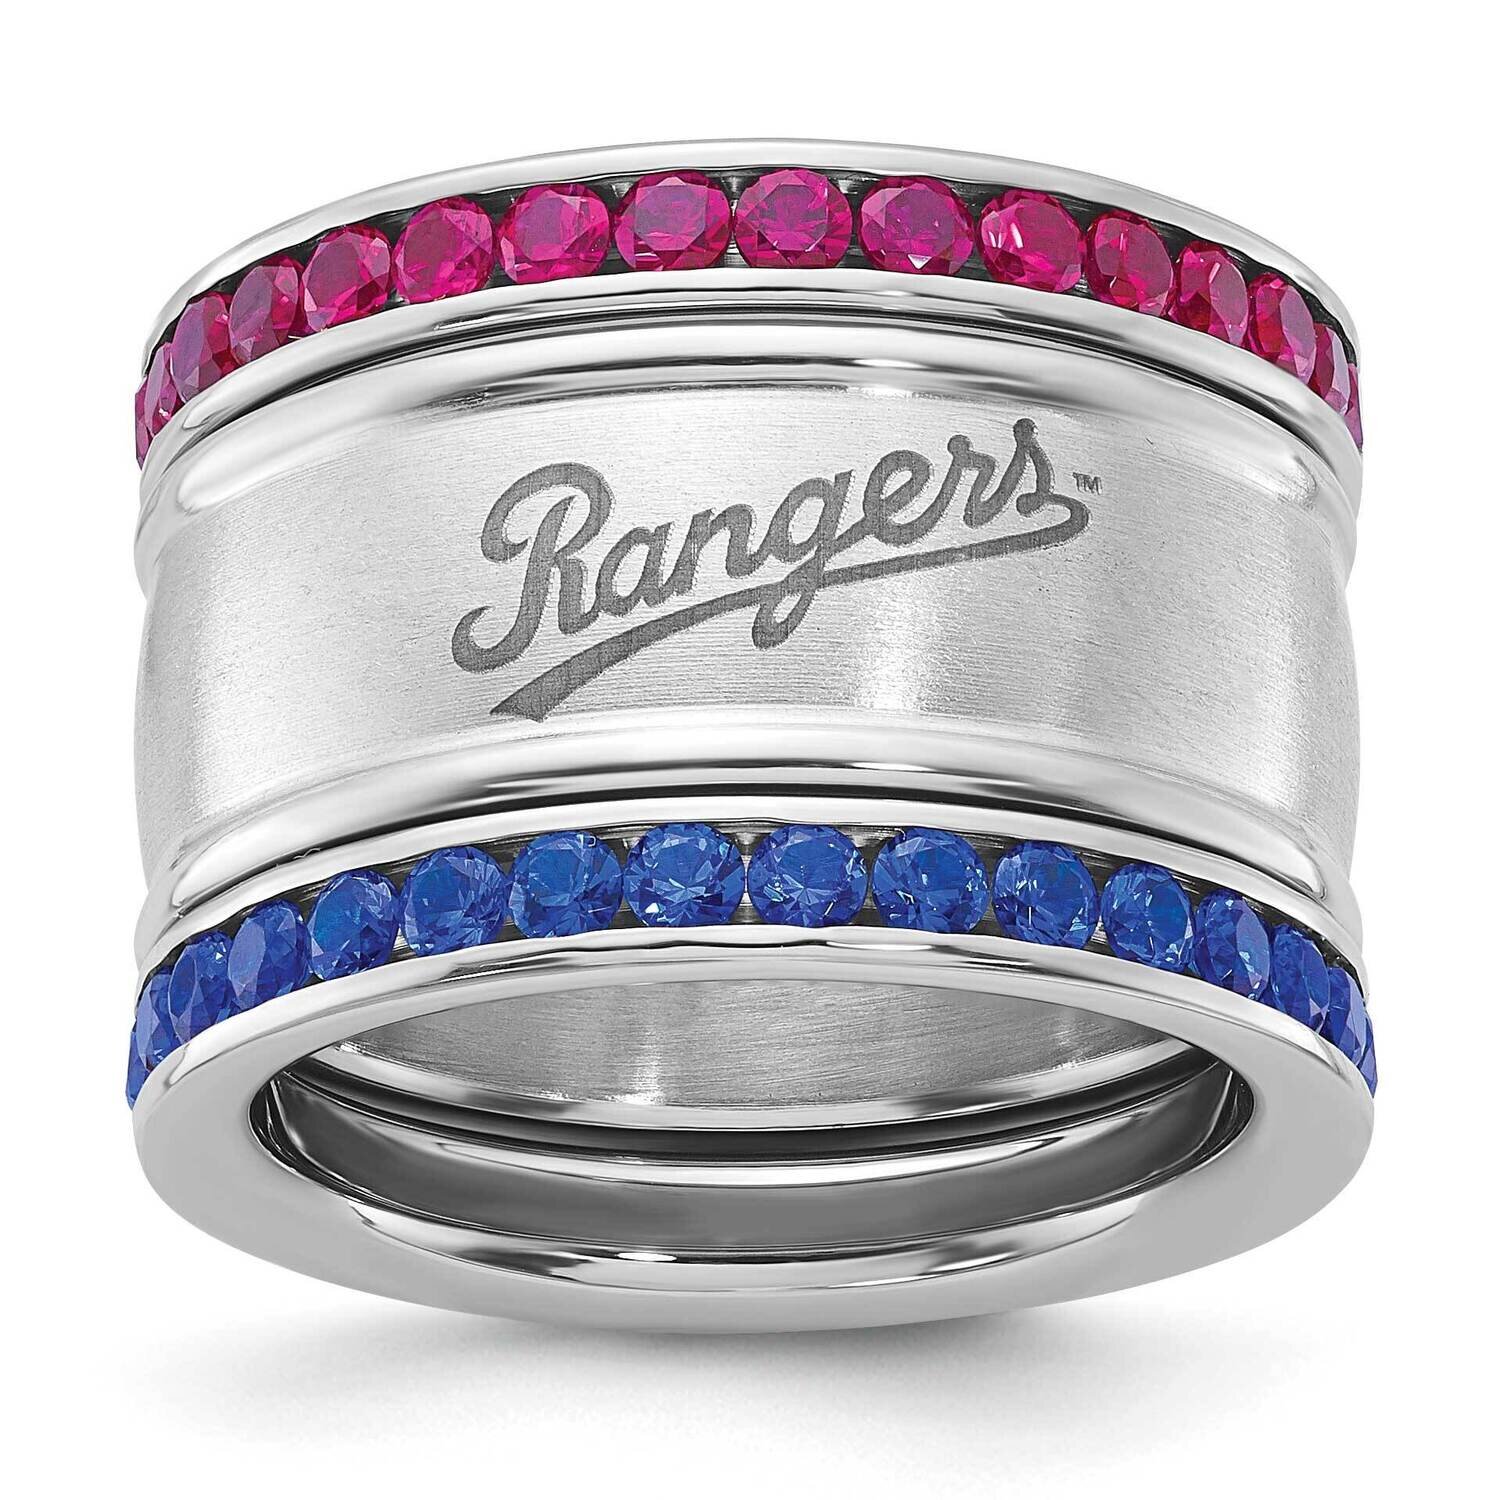 MLB Texas Rangers Crystal Triple Stacked Ring Set Stainless Steel RAN035CR-SZ6